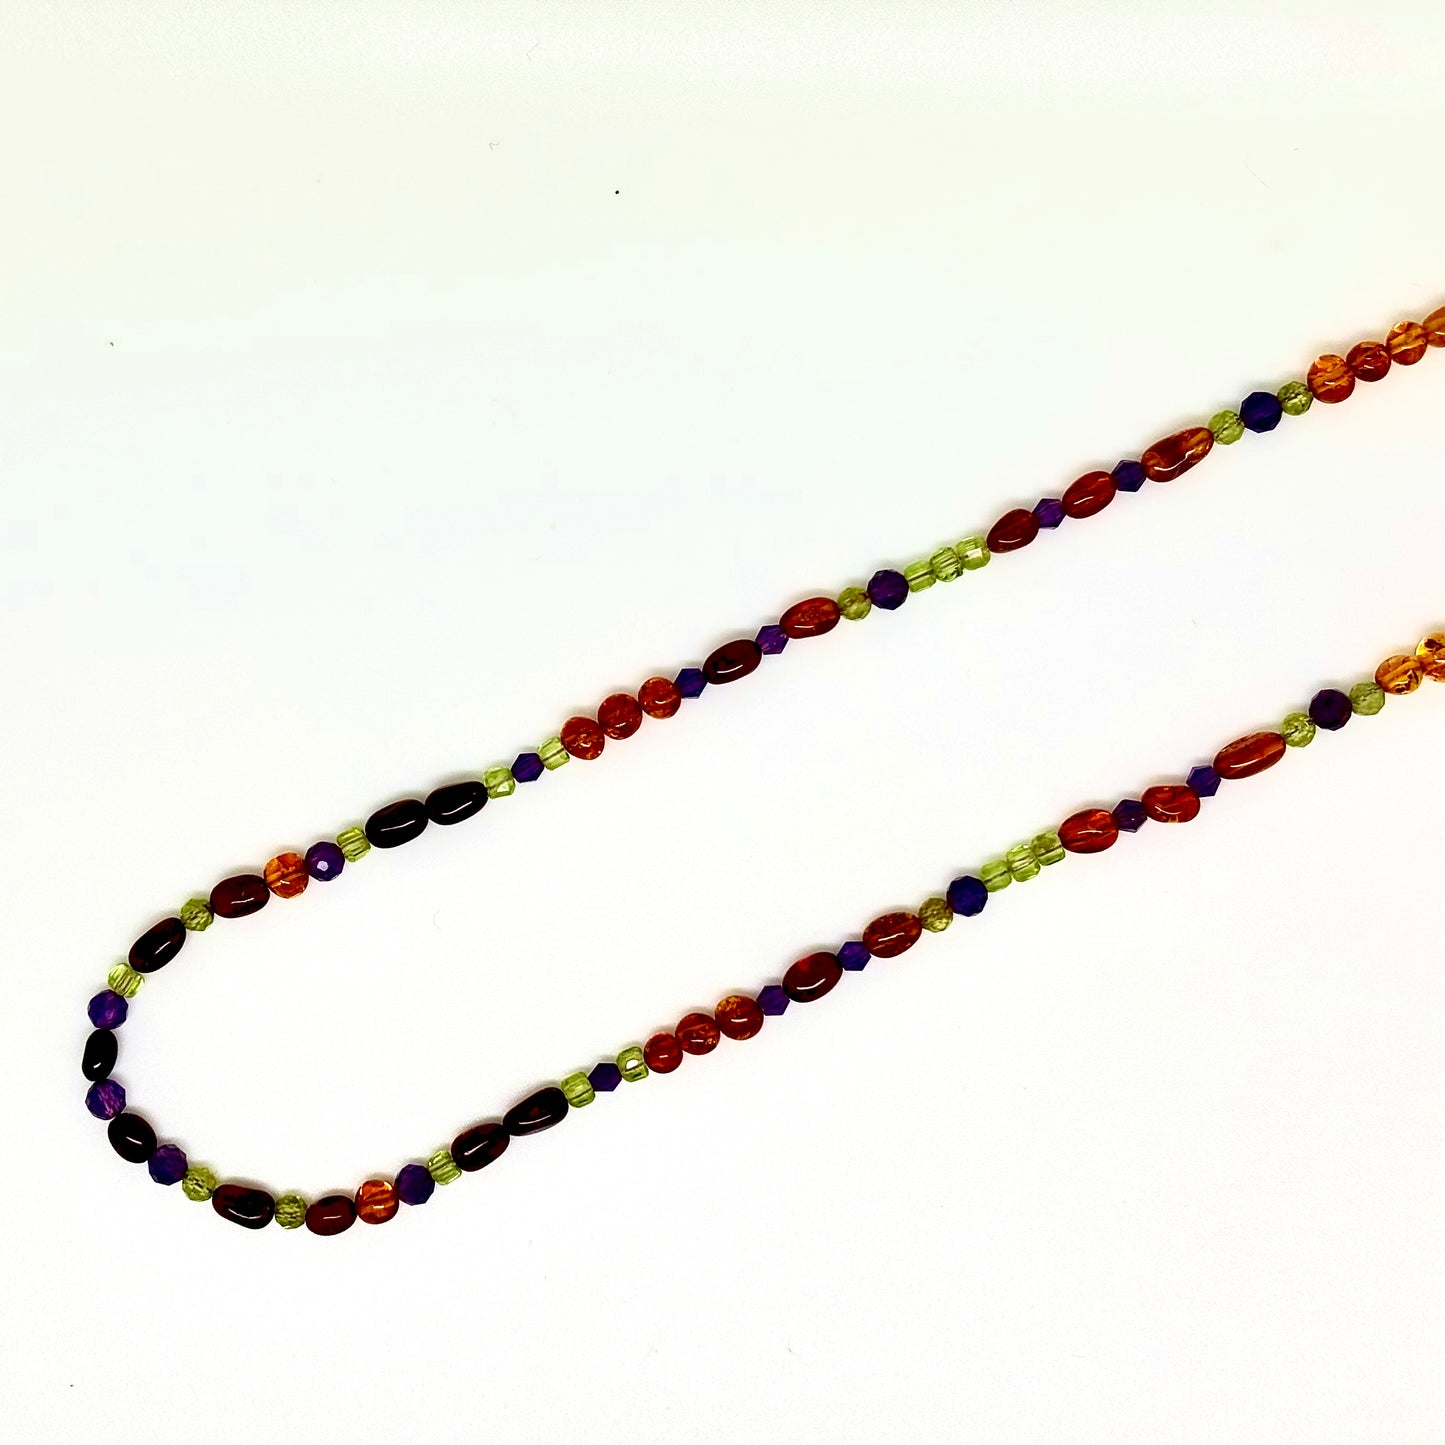 Handmade One of a Kind Multi Color Baltic Amber, Peridot and Amethyst Bead Necklace